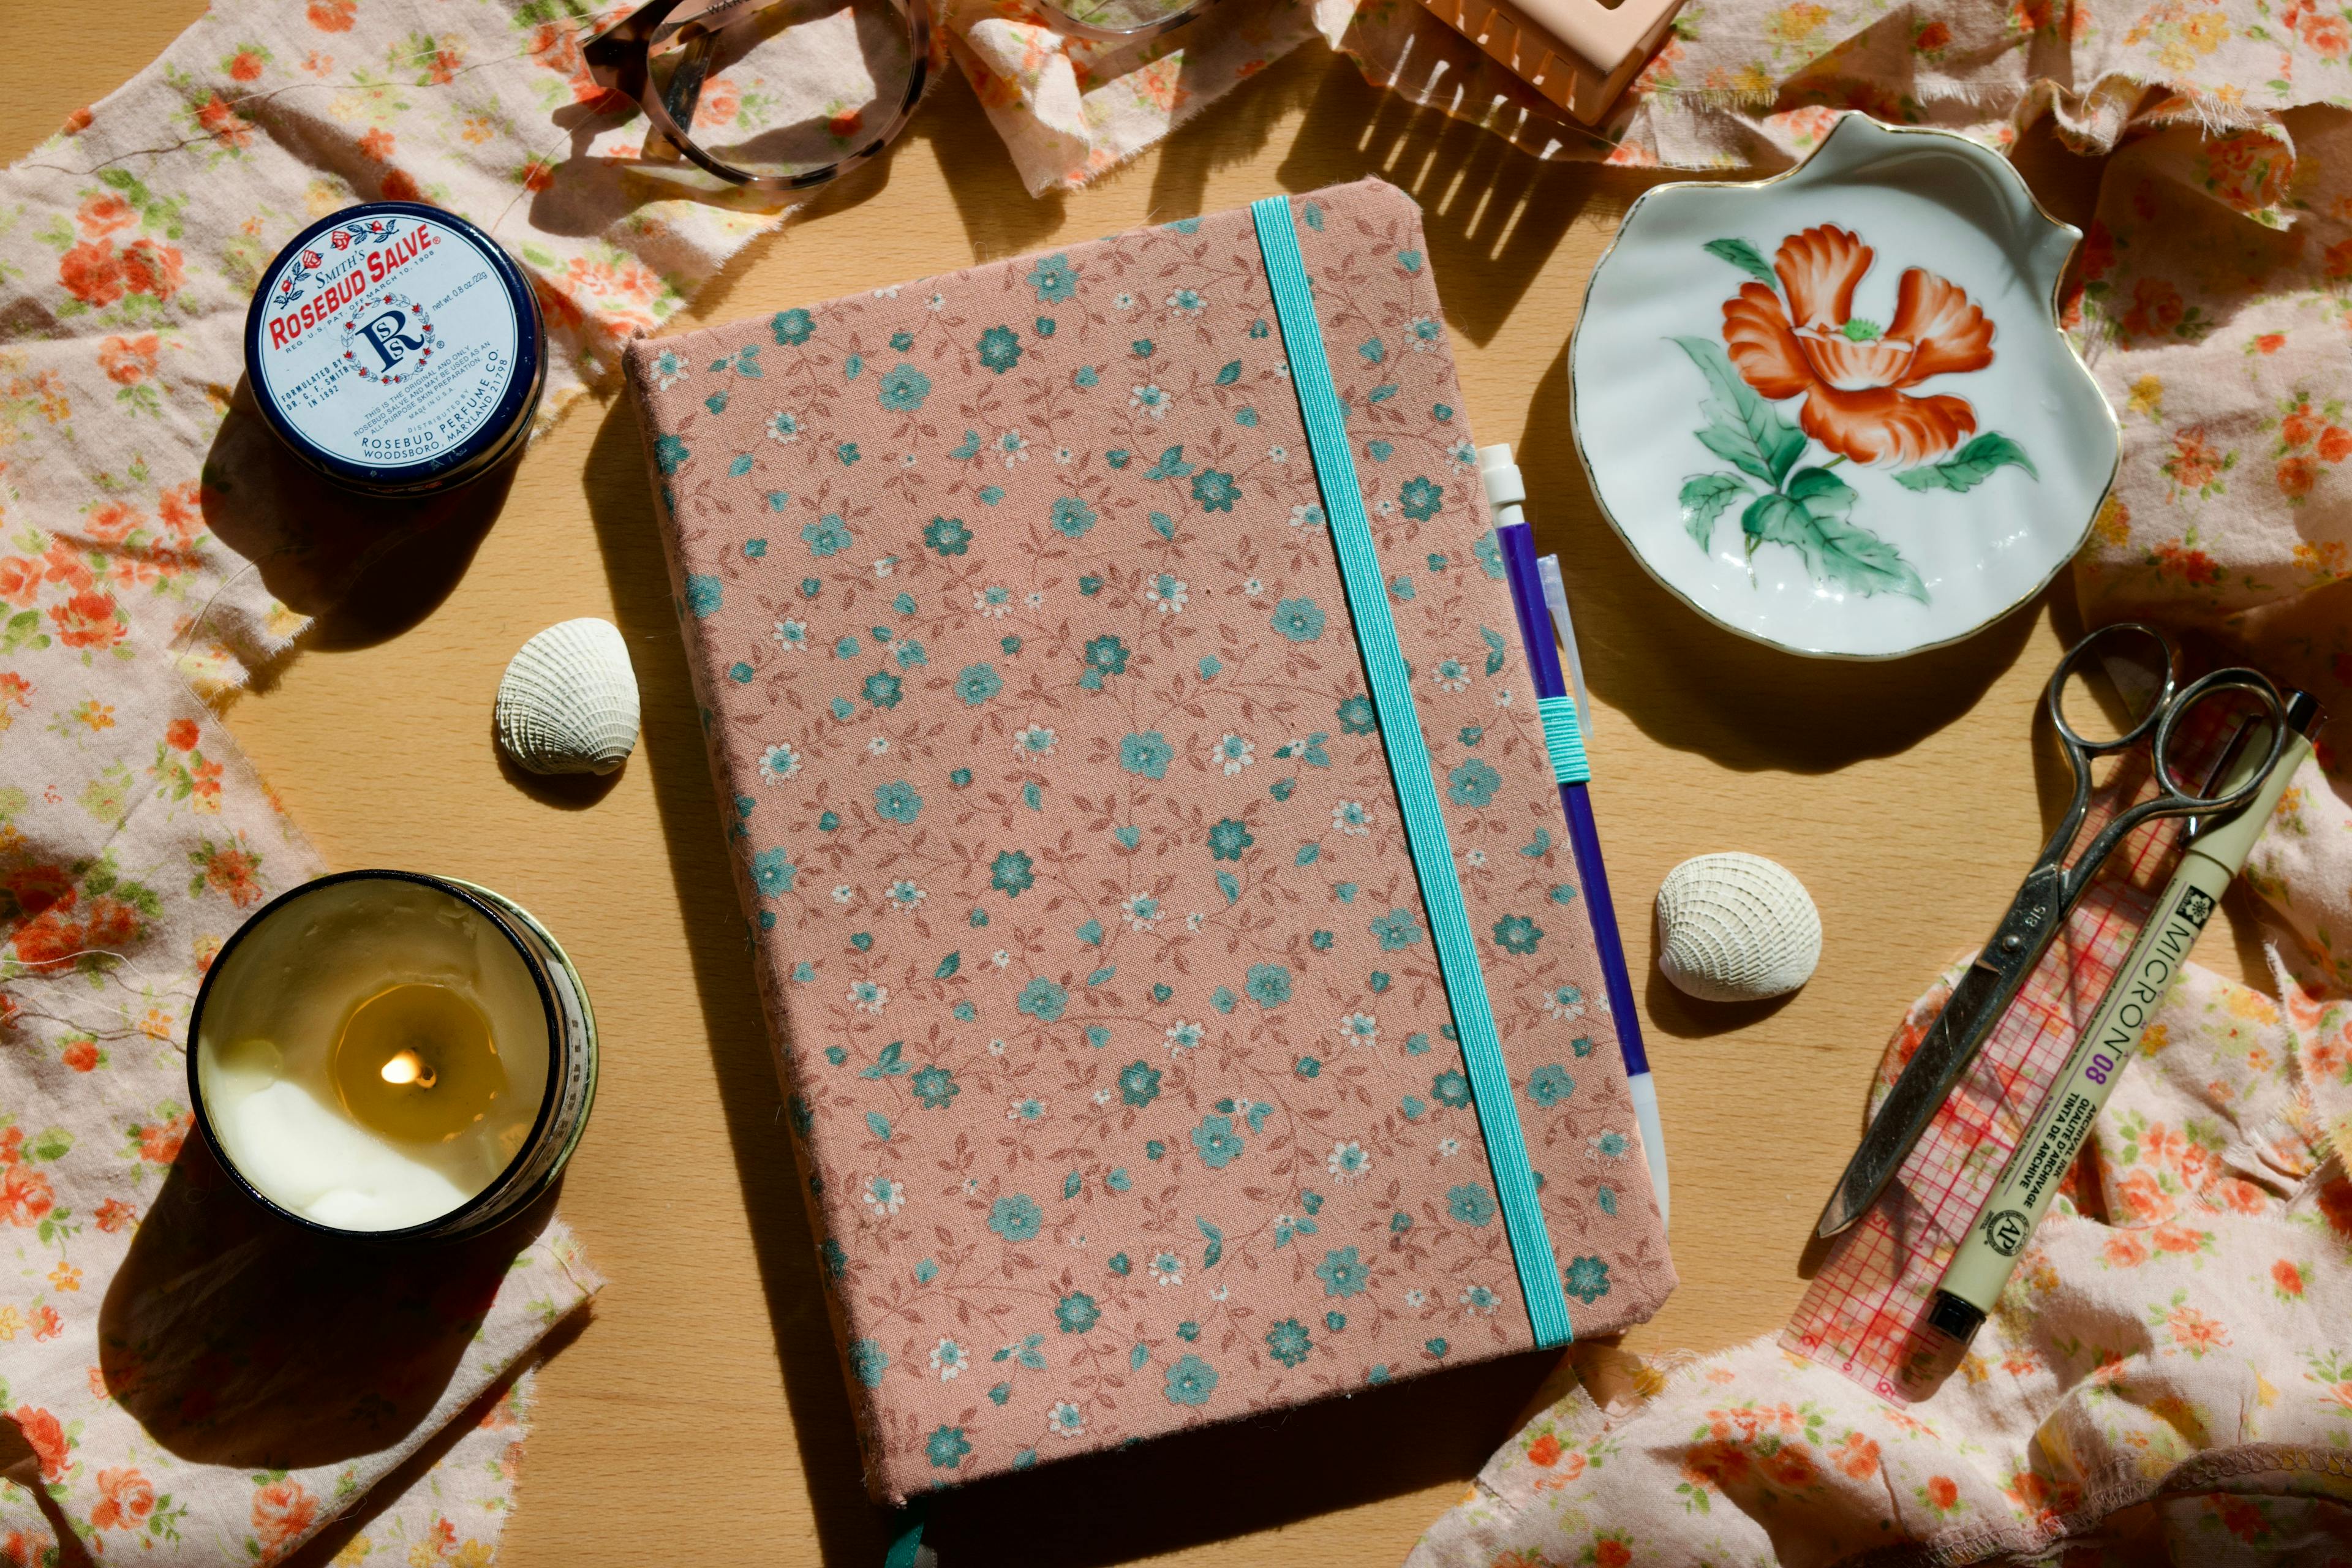 A journal is lying on a wooden table. Its cover is a pink vintage fabric with tiny blue flowers. The journal is held closed by a minty green elastic band and there are two ribbon bookmarks, one the same minty green and one grey. It is surrounded by various desk items such as a candle, glasses, pens, lip balm, a small porcelain dish, and a scrunch of different pink floral fabric. 